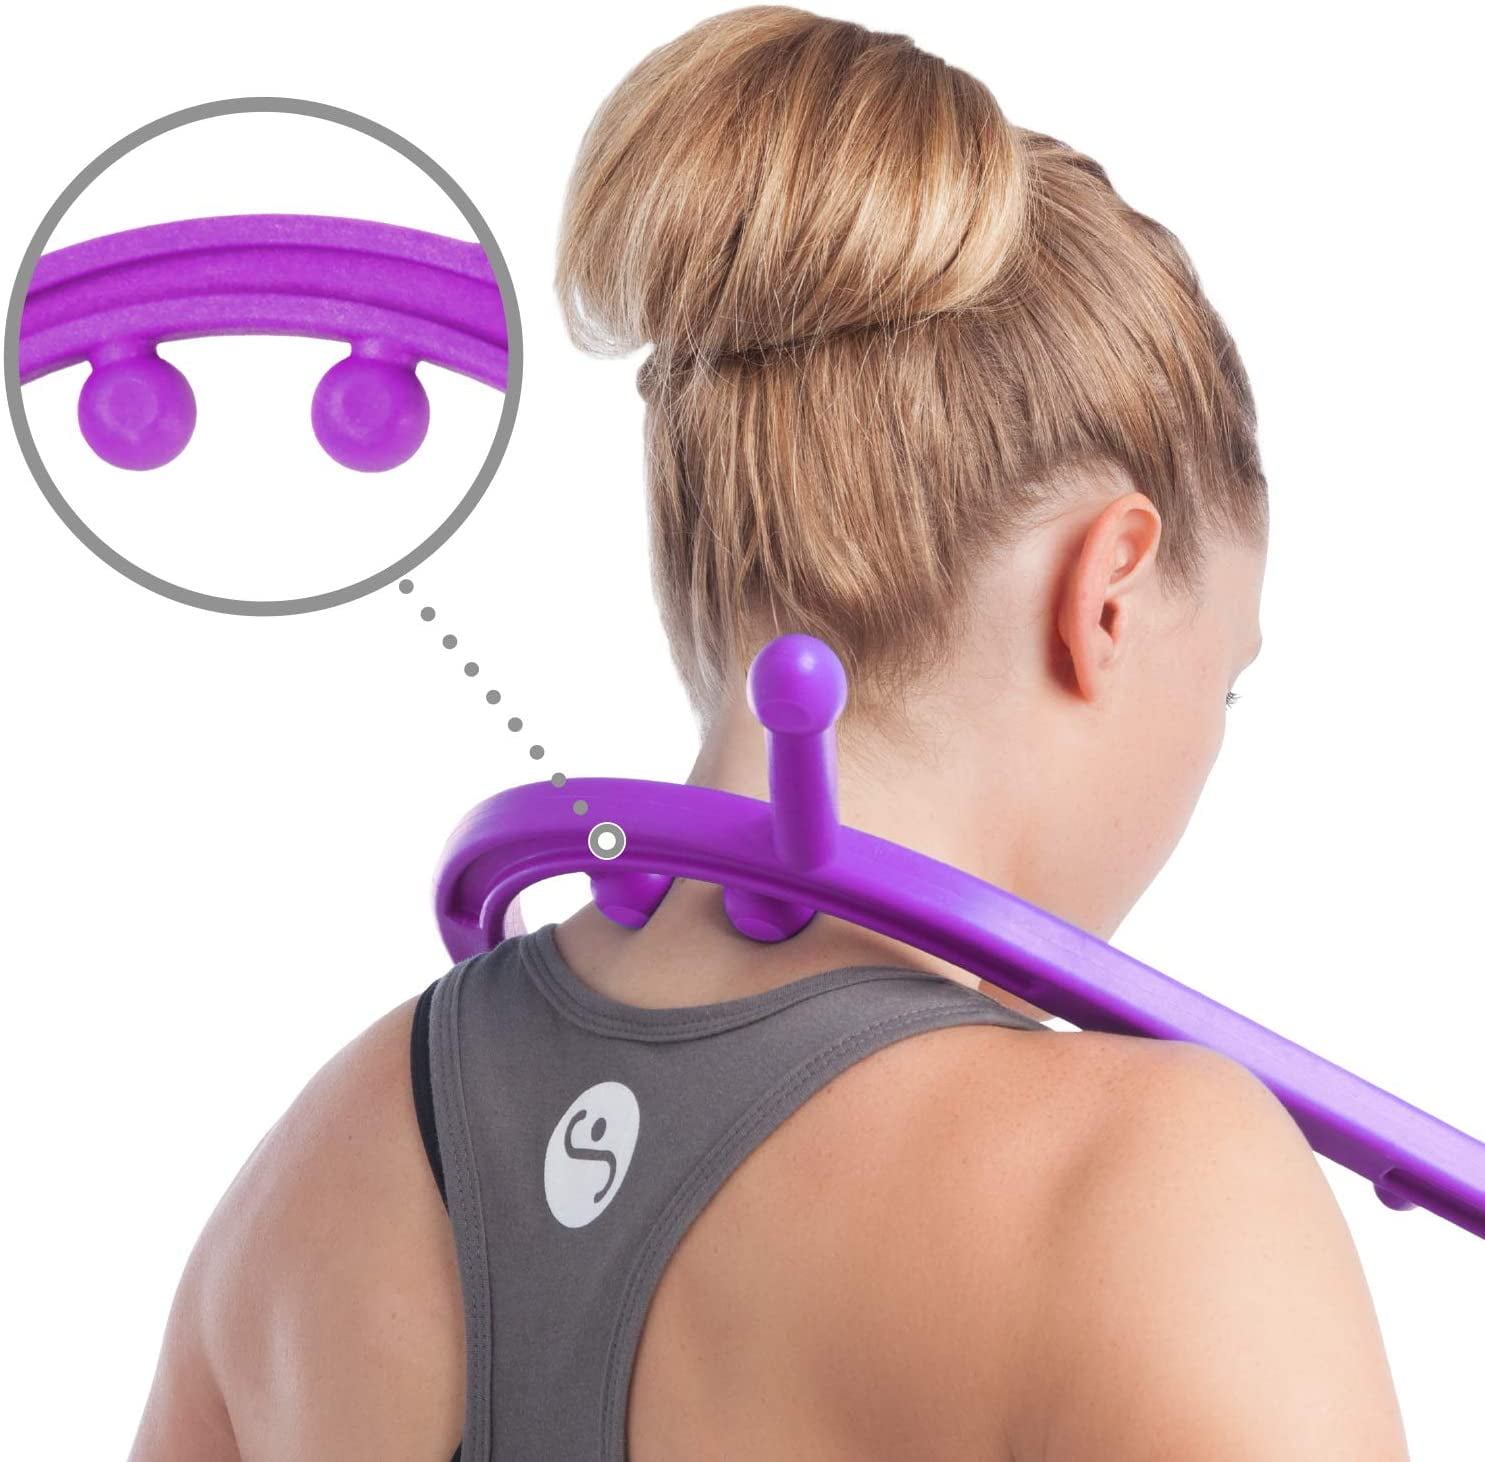 Body Back Buddy Classic - USA Made- Trigger Point Massage Tool, Neck and Back Massager Handheld, Manual Self Massager, Massage Cane, Muscle Knot